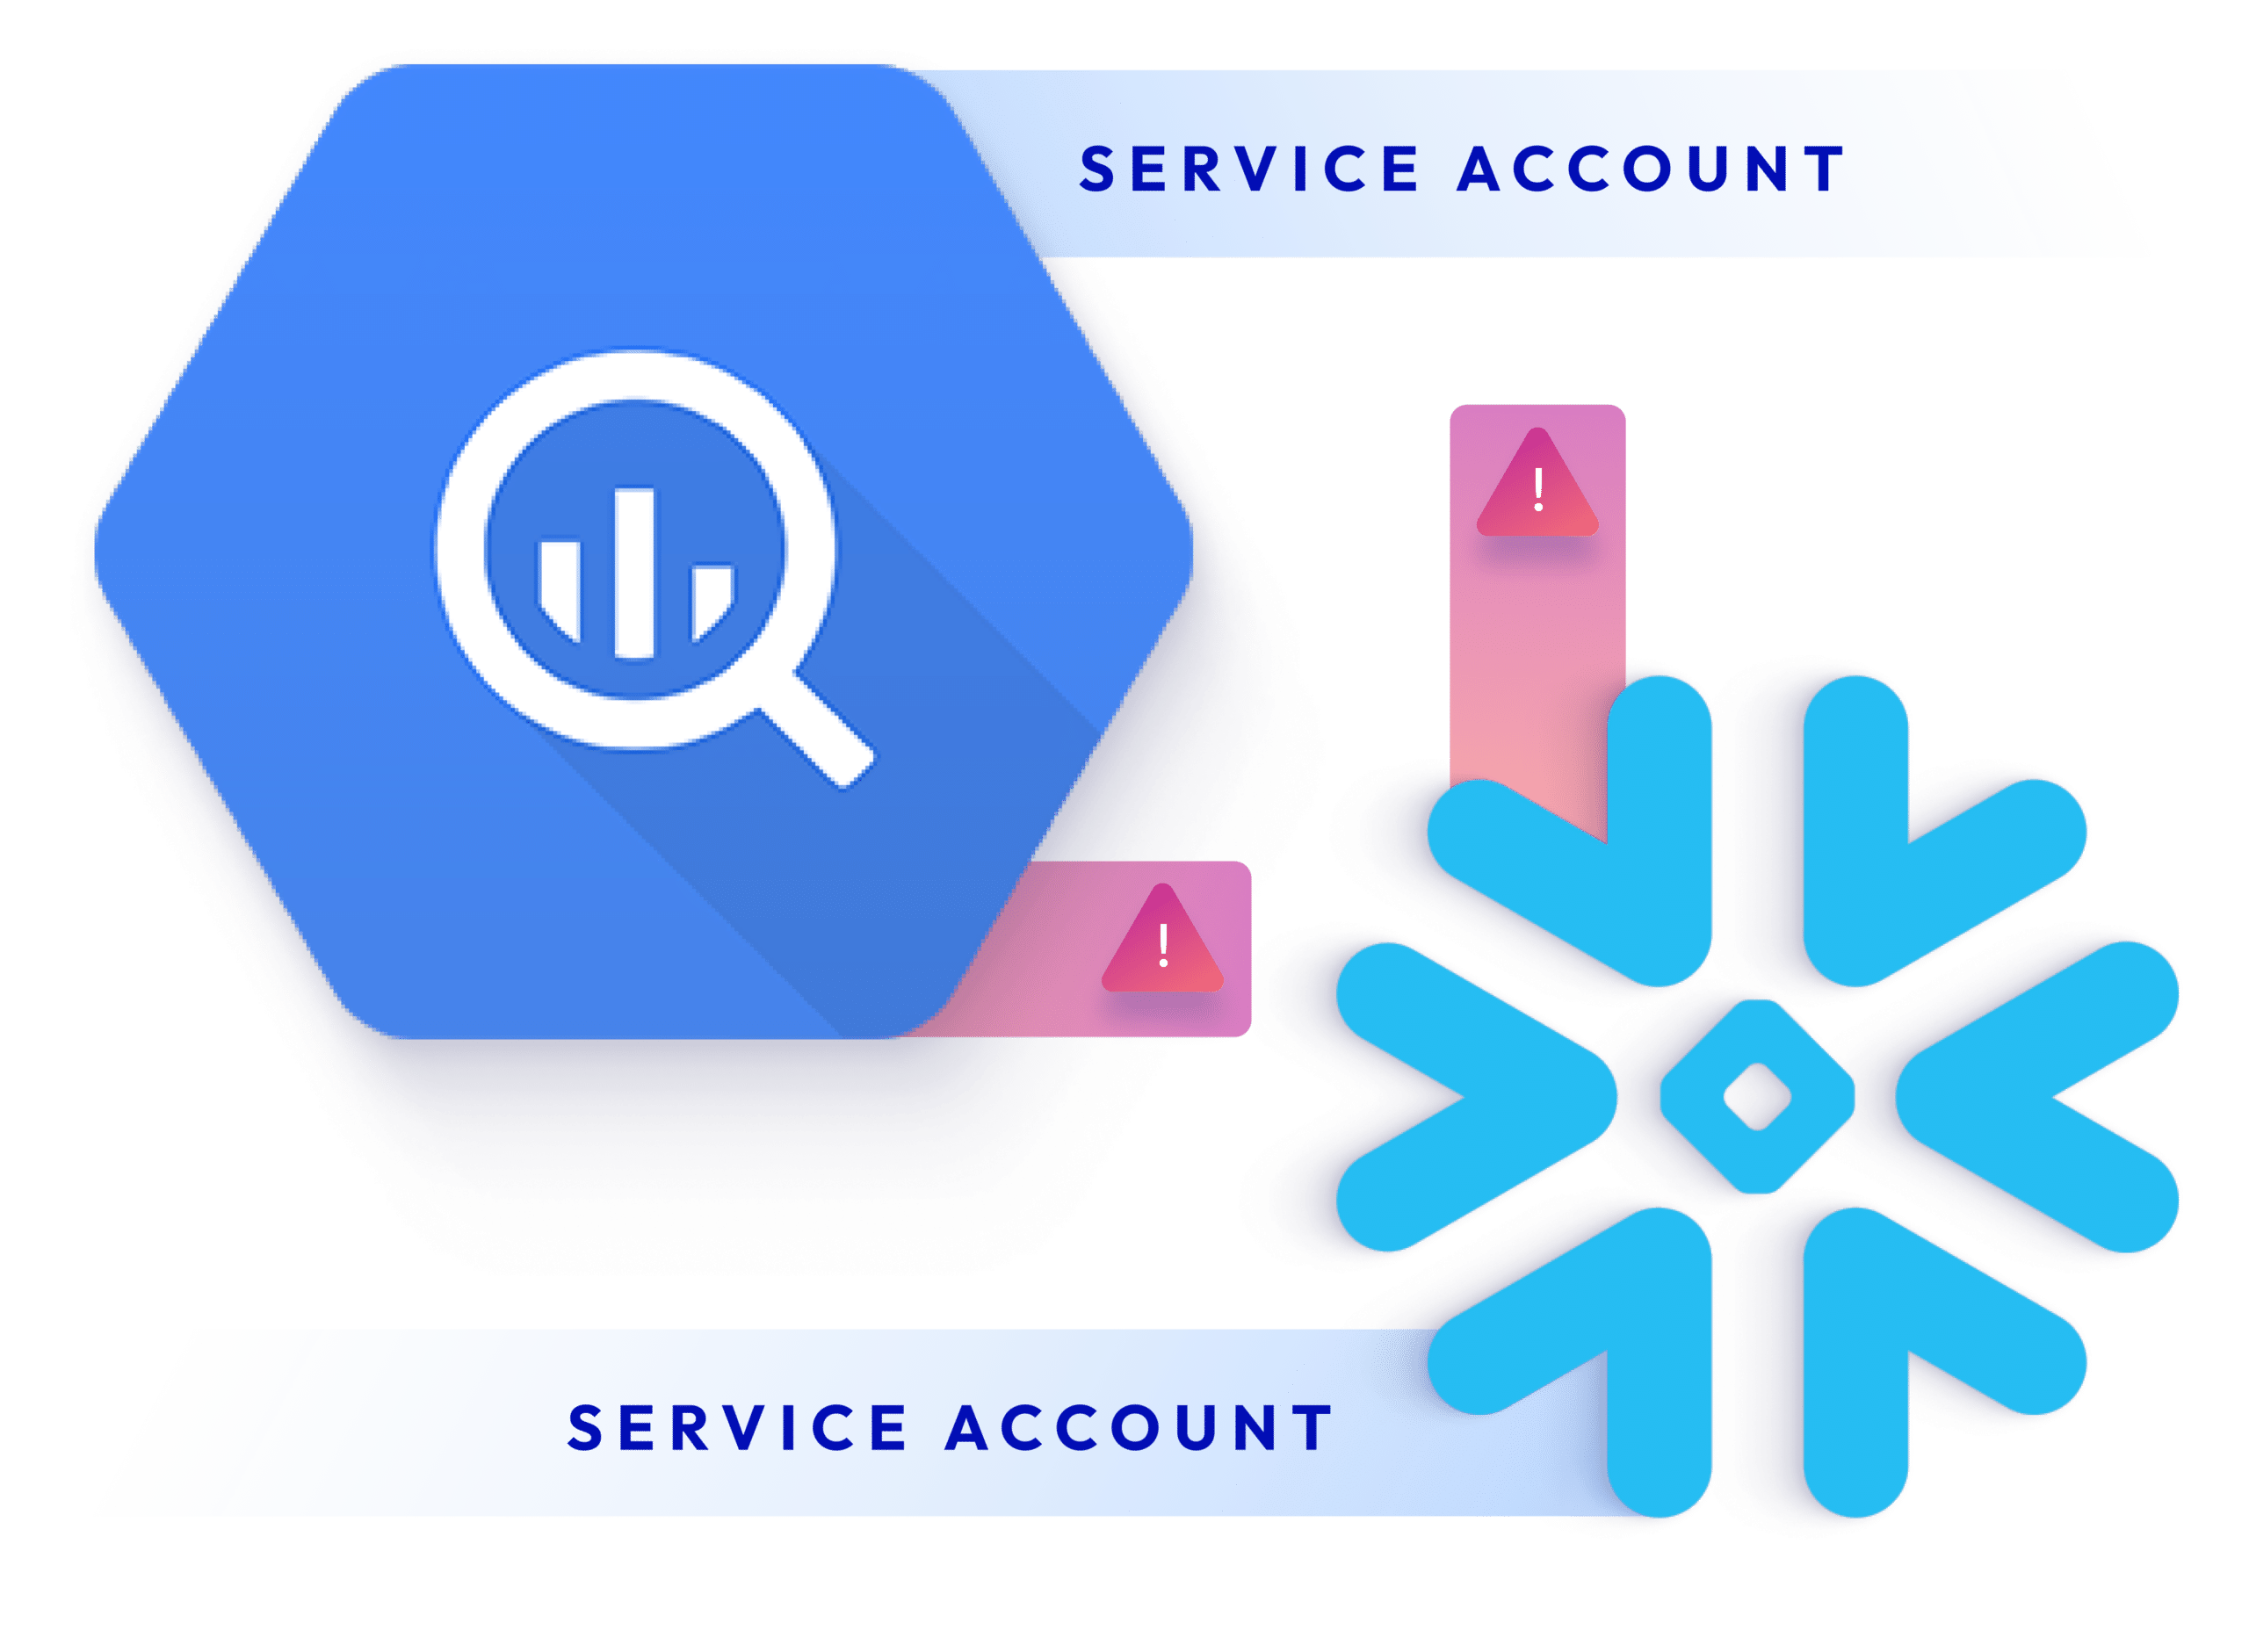 How to Close the Service Account Security Gap in GCP and Snowflake